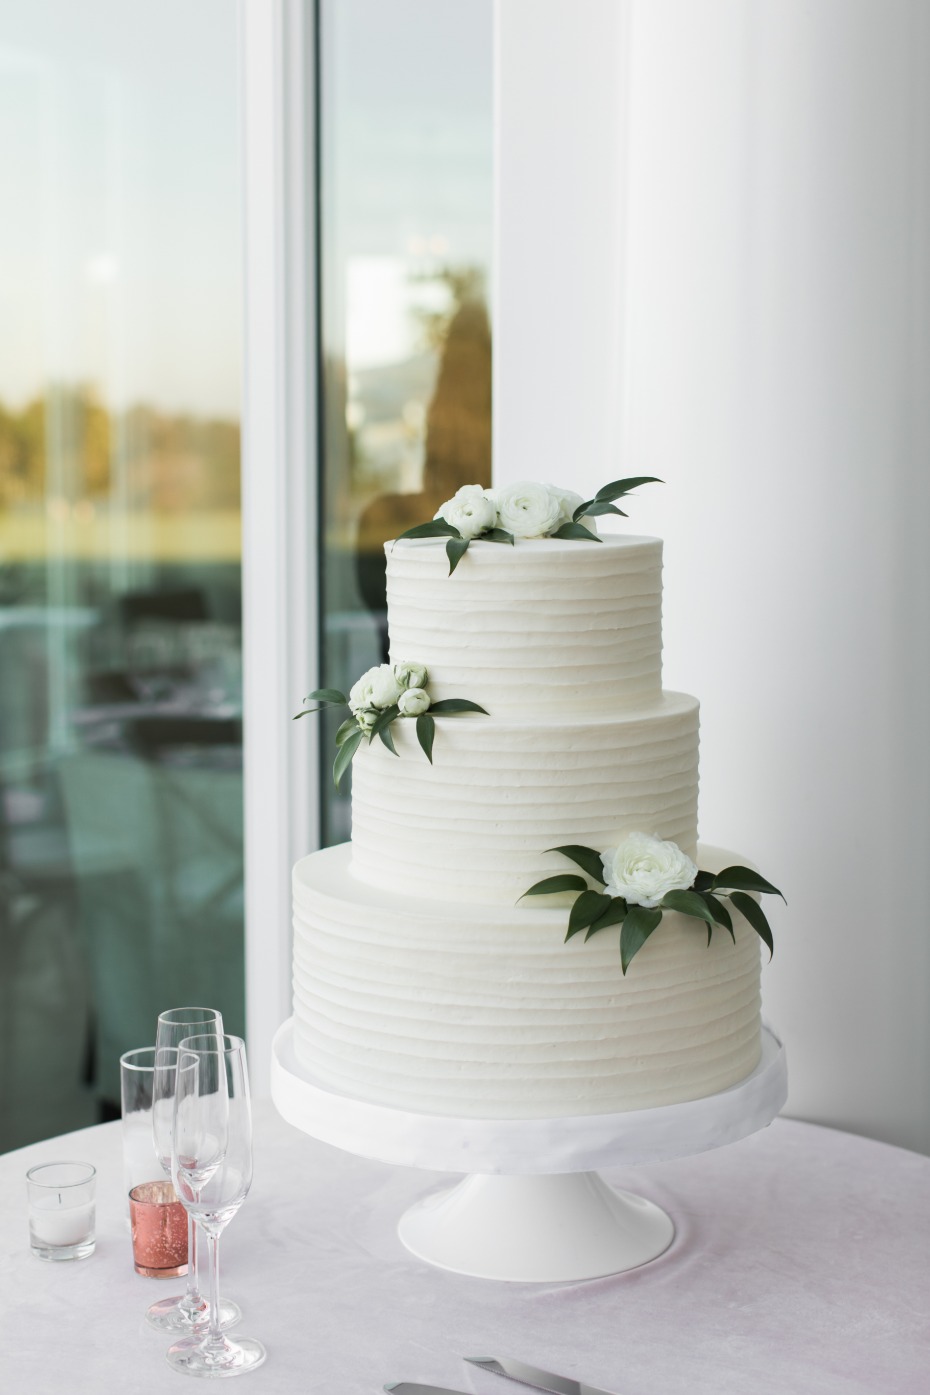 Simple white and green wedding cake